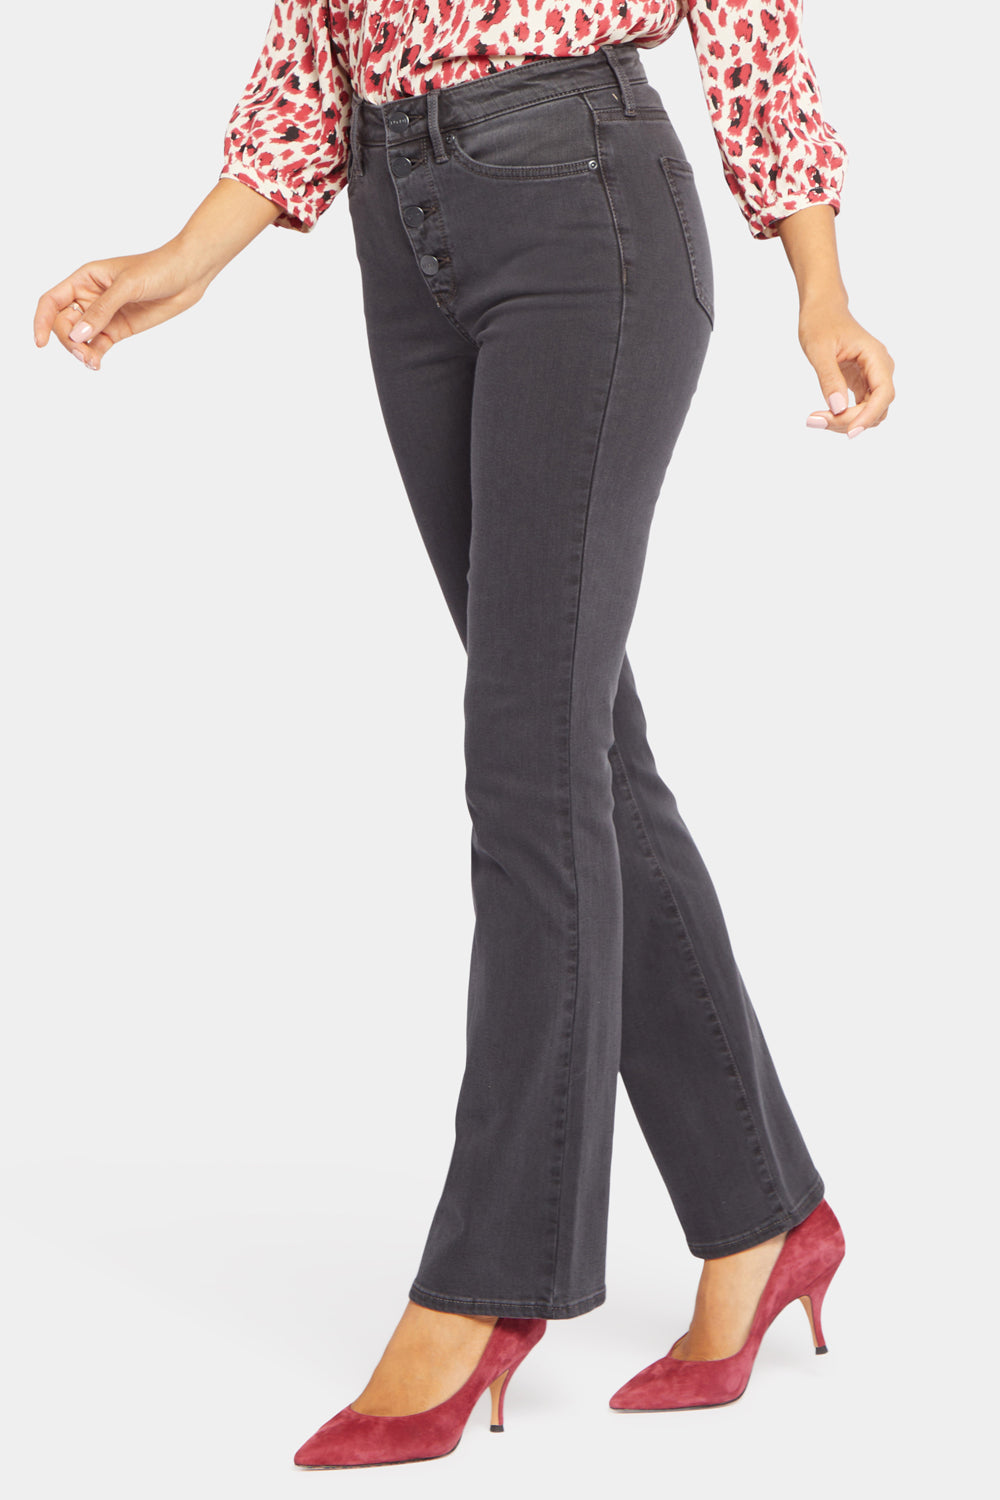 Barbara Bootcut Jeans In Petite In Sure Stretch® Denim With Exposed Button  Fly - Sierra Grey | NYDJ